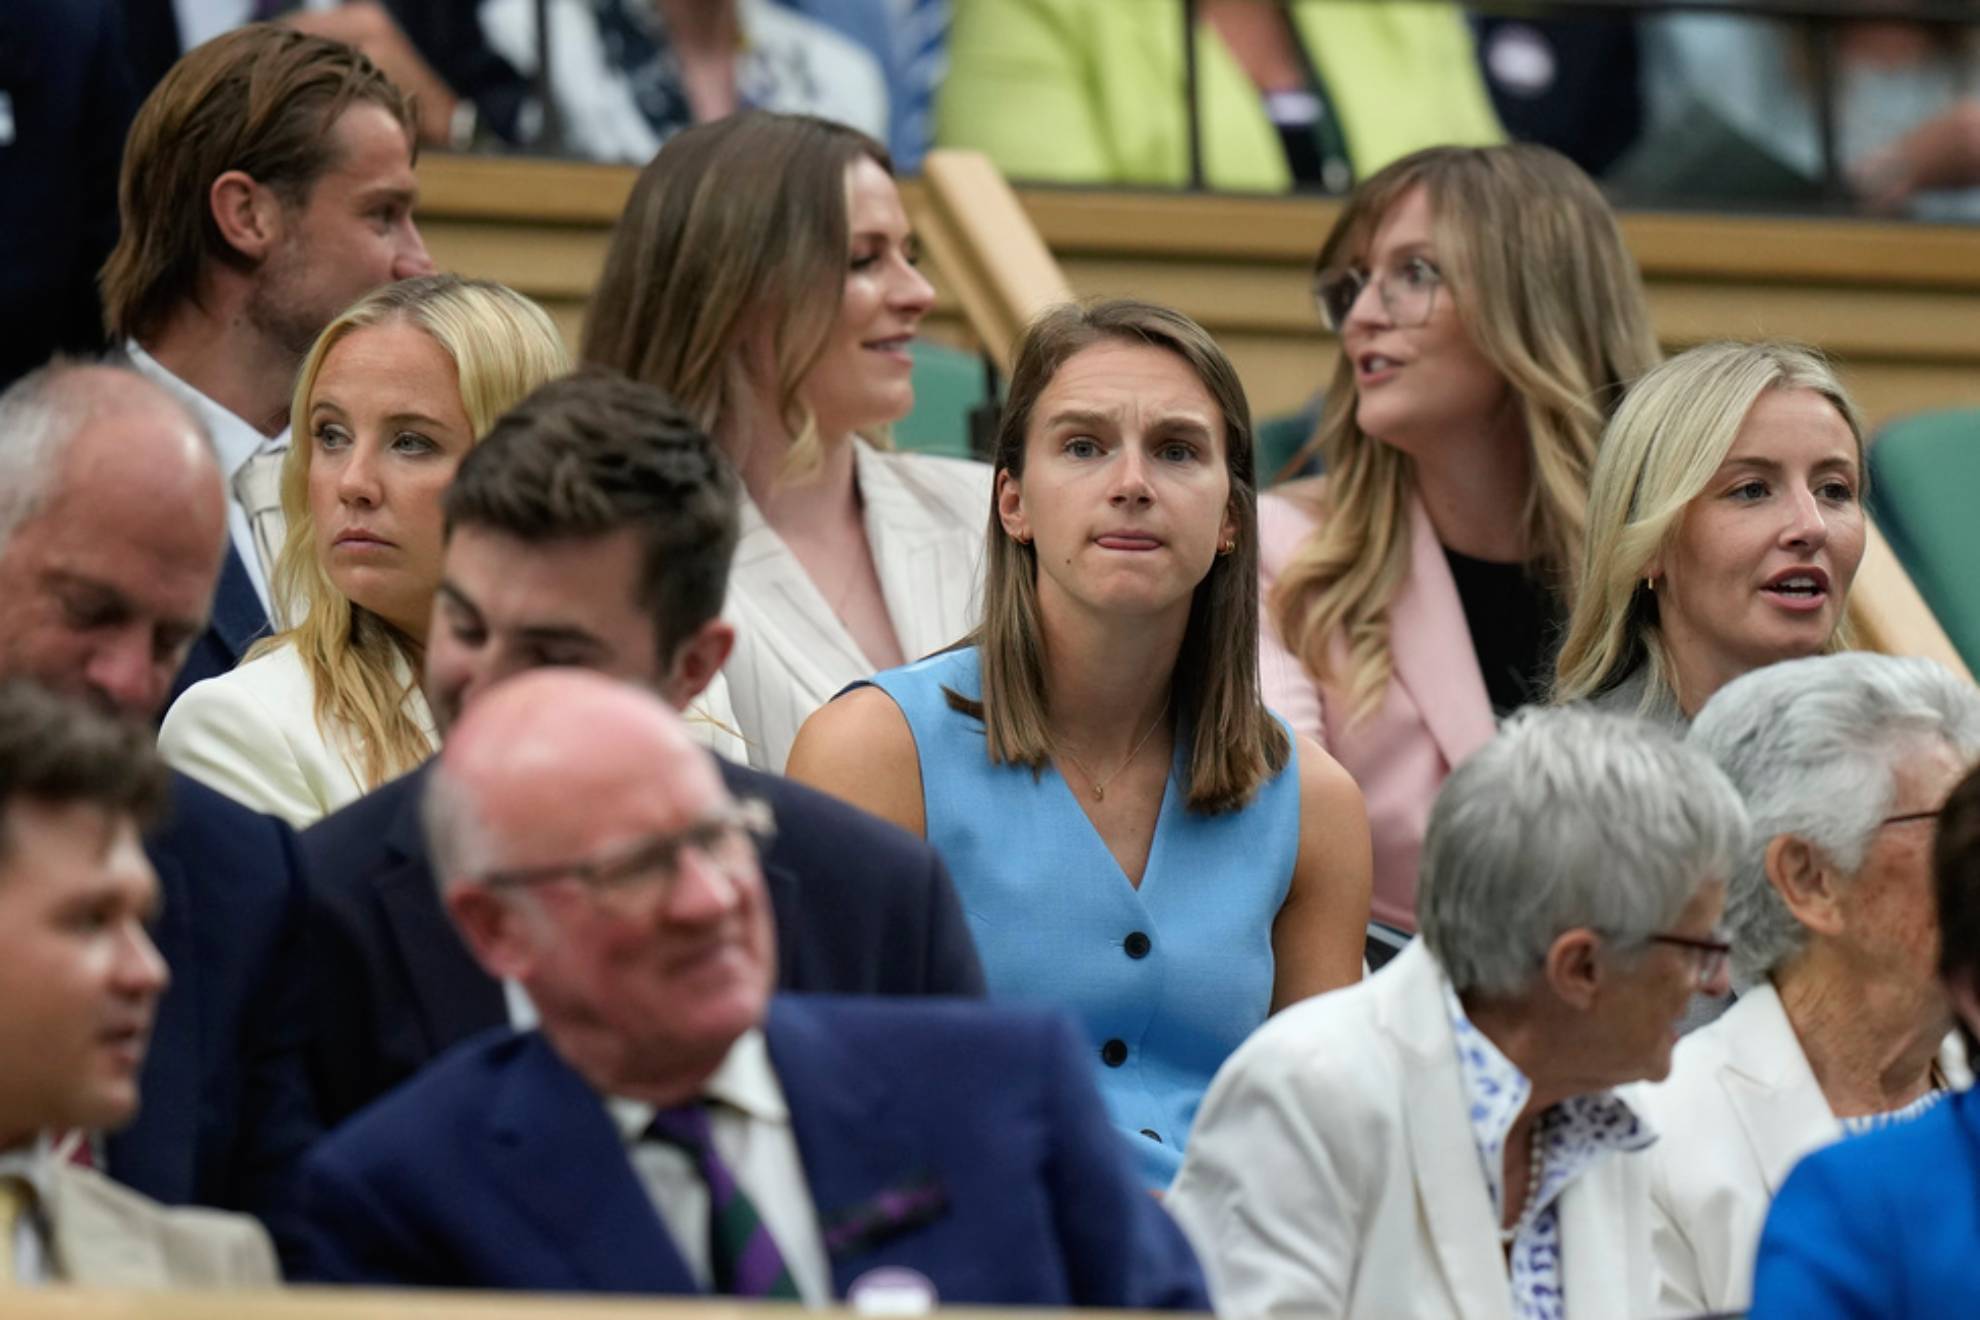 Soccer players Leah Williamson, Vivianne Miedema and Beth Mead, from right, take their seats in the Royal Box /